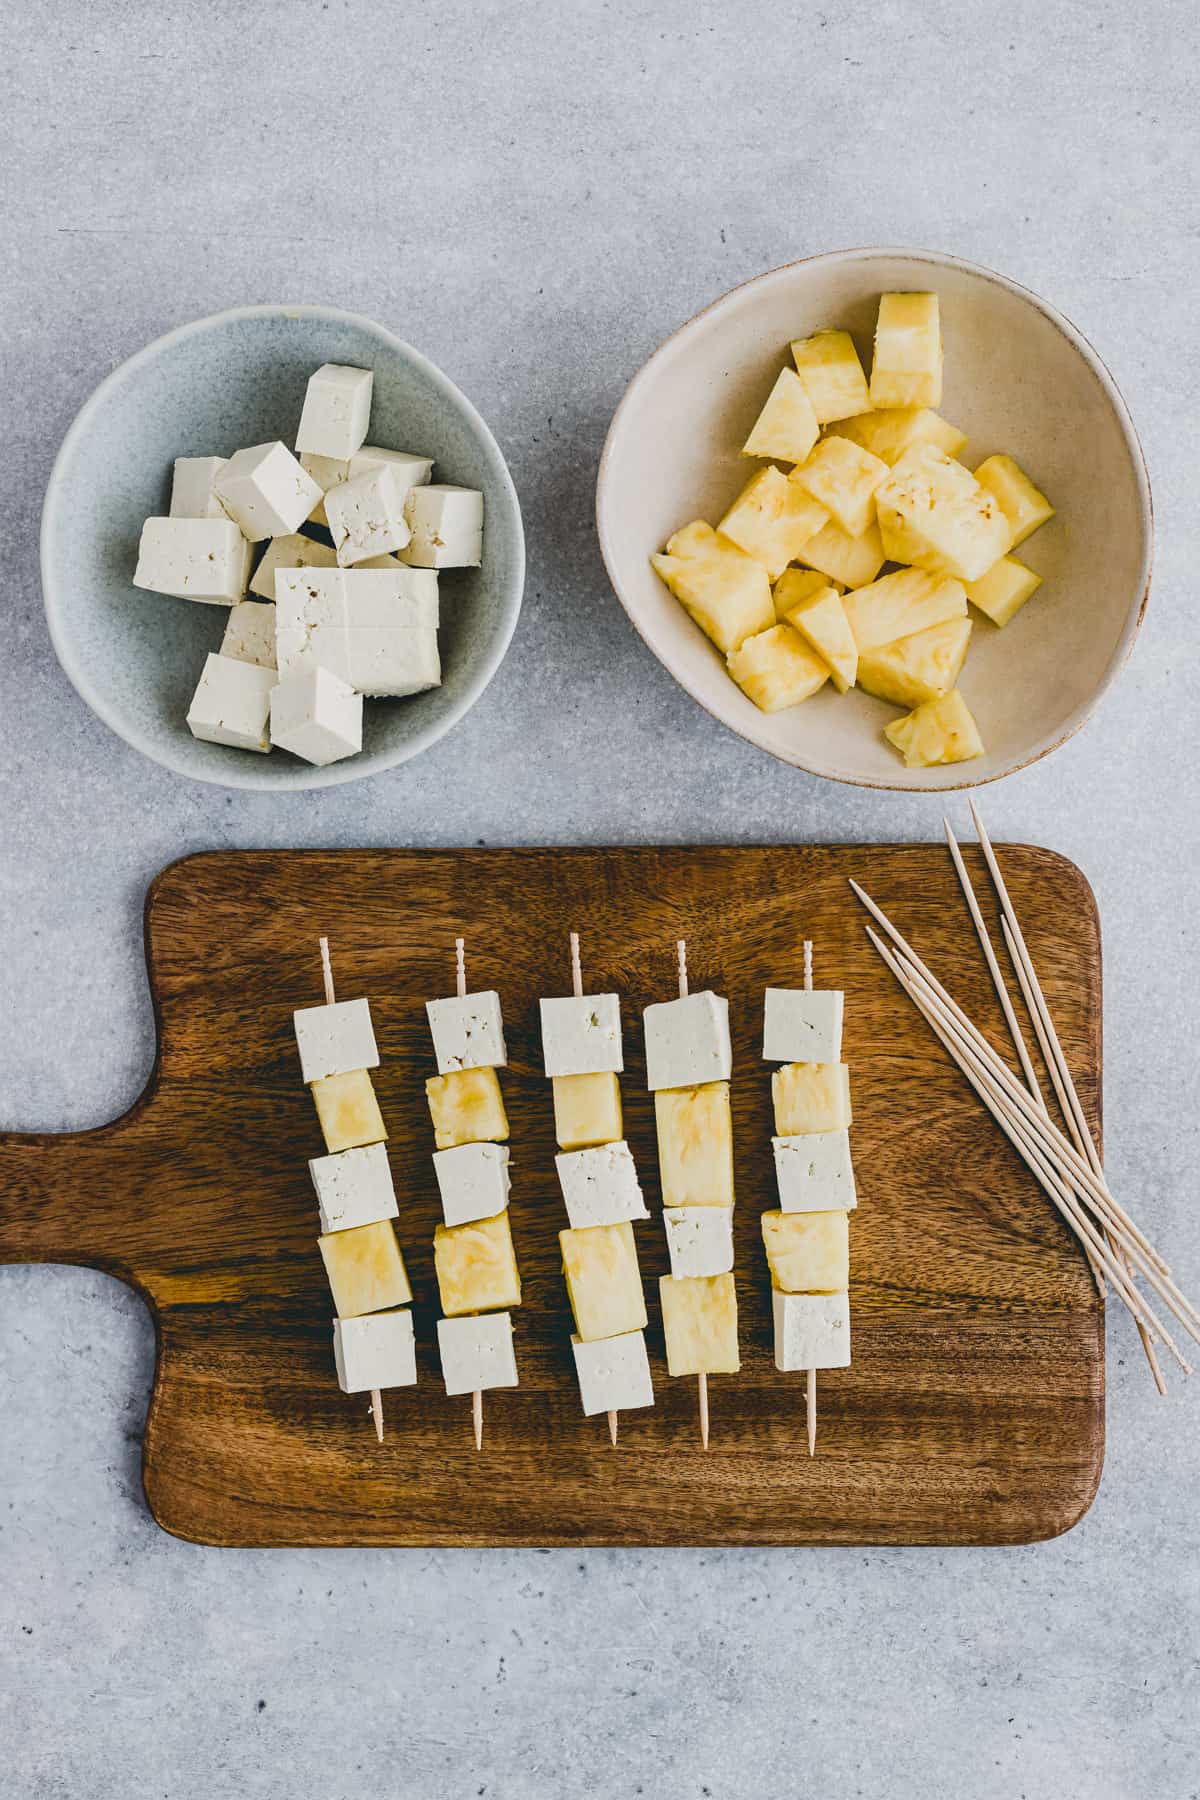 Top view of two bowls, one with cubes of tofu in it, the other with cubes of pineapple, with a chopping board of assembled tofu skewers next to it. 